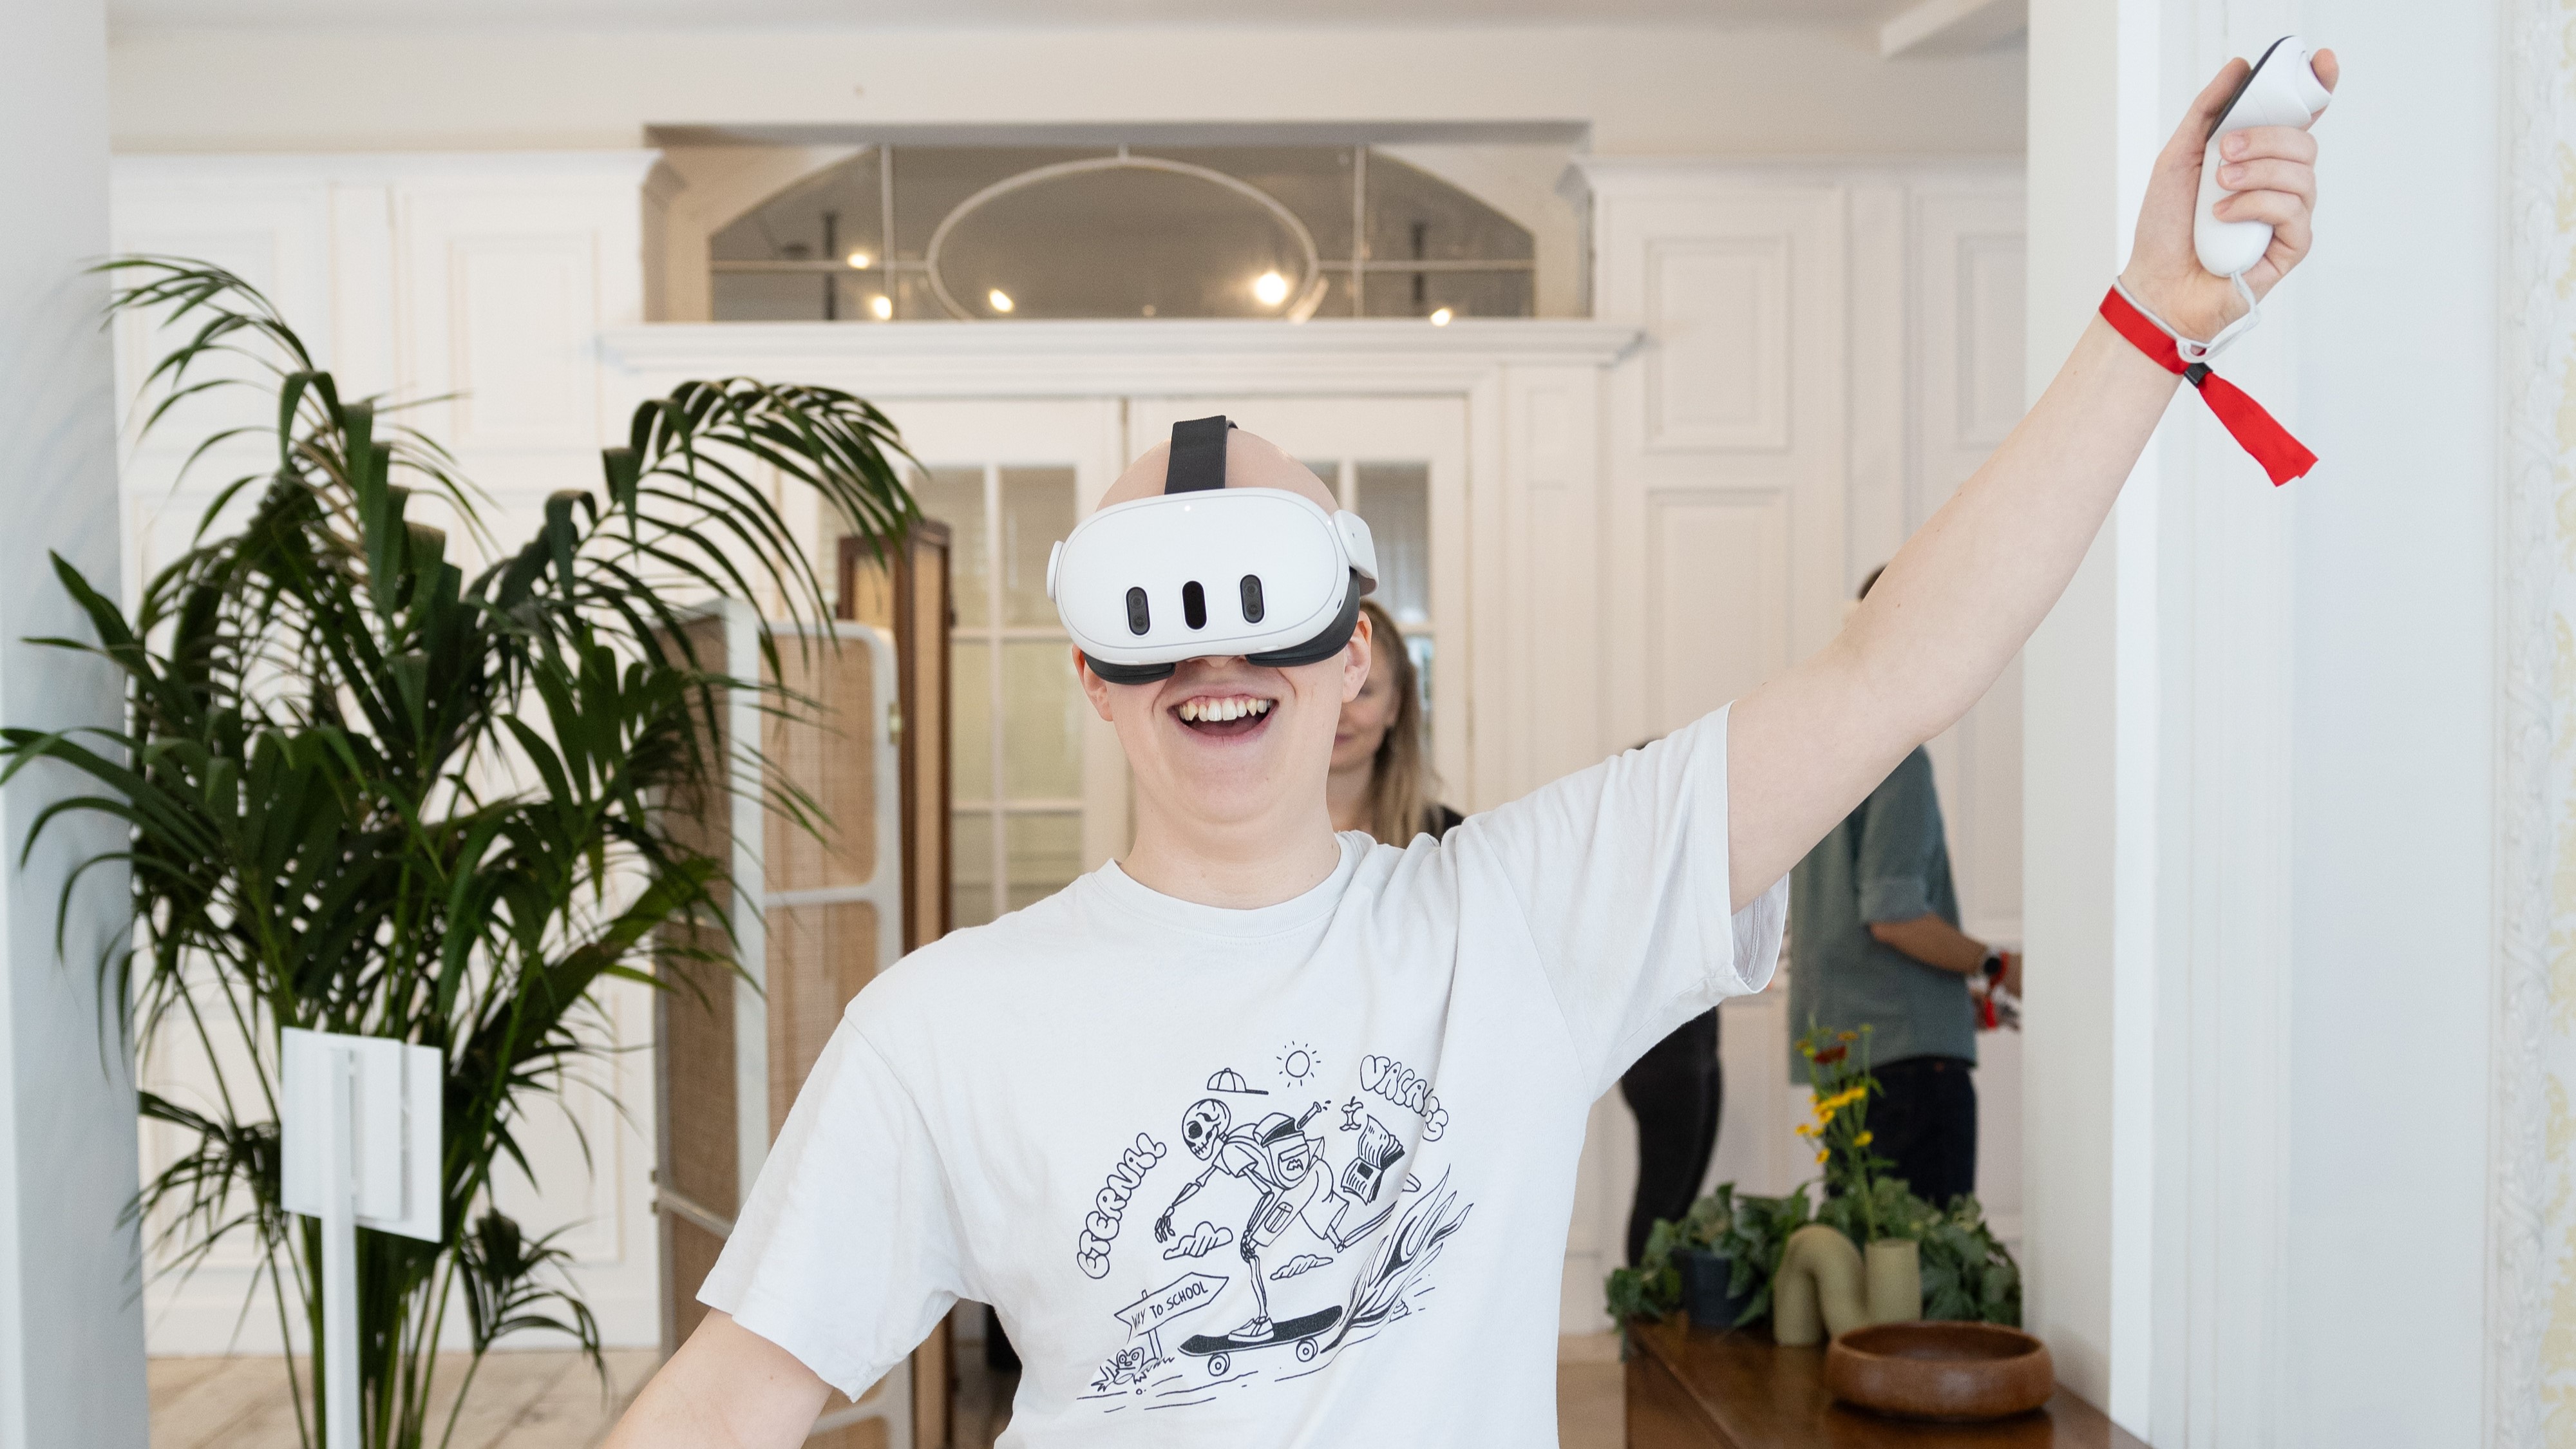 Hamish striking a disco dance pose while wearing the Meta Quest 3 headset